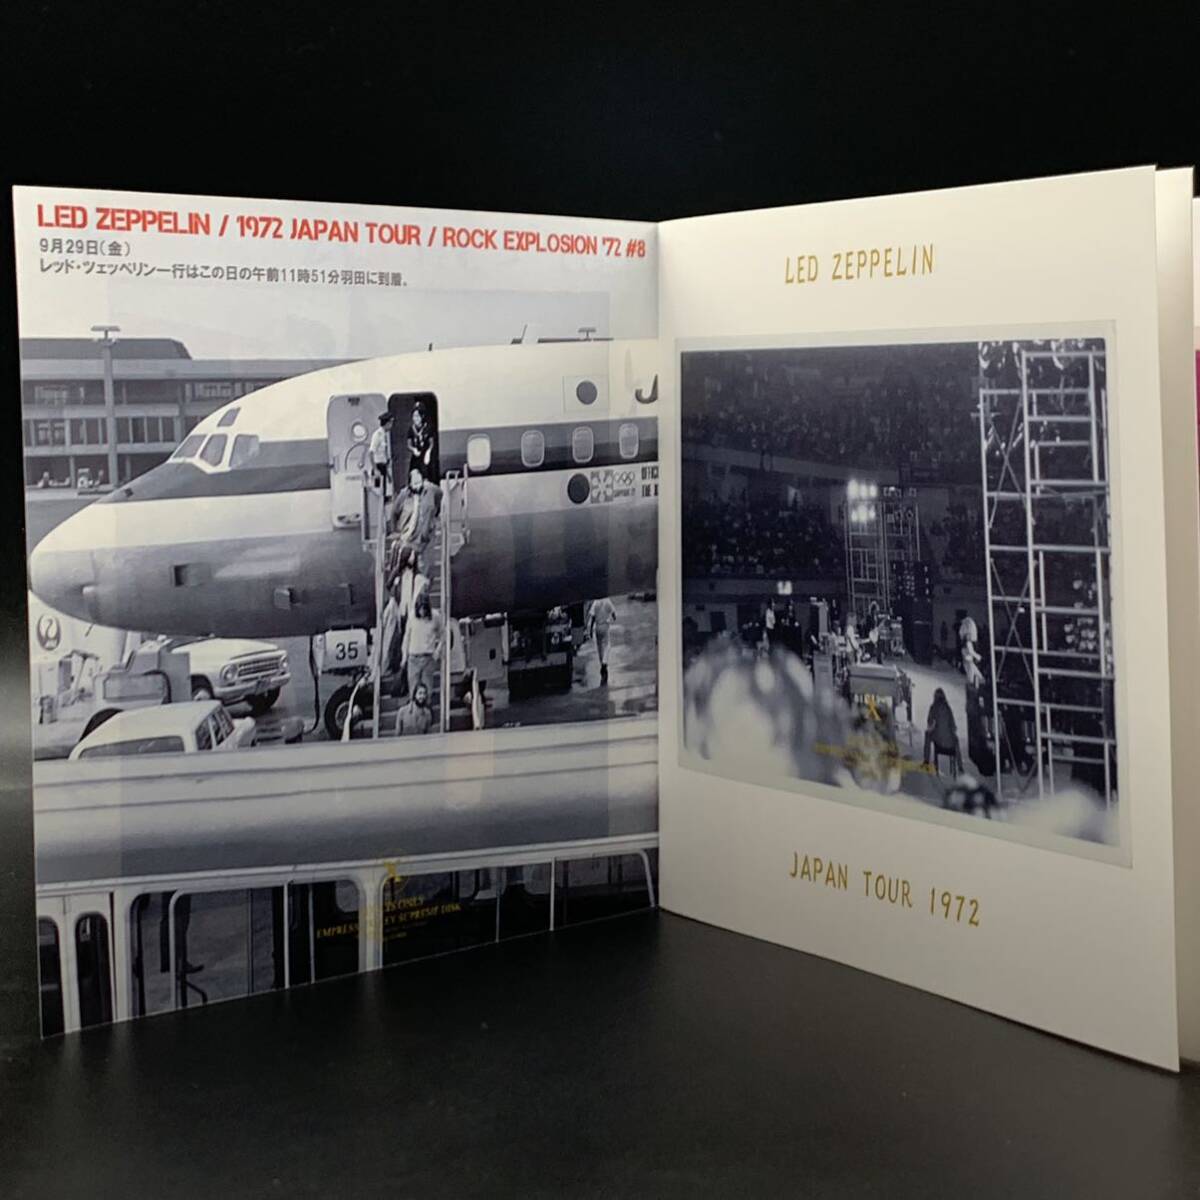 LED ZEPPELIN / JET STREAM - Pro Use Only 4CD Box with Booklet Set : Super Rare!! Hard to Find!! For enthusiastic collector only!!の画像5